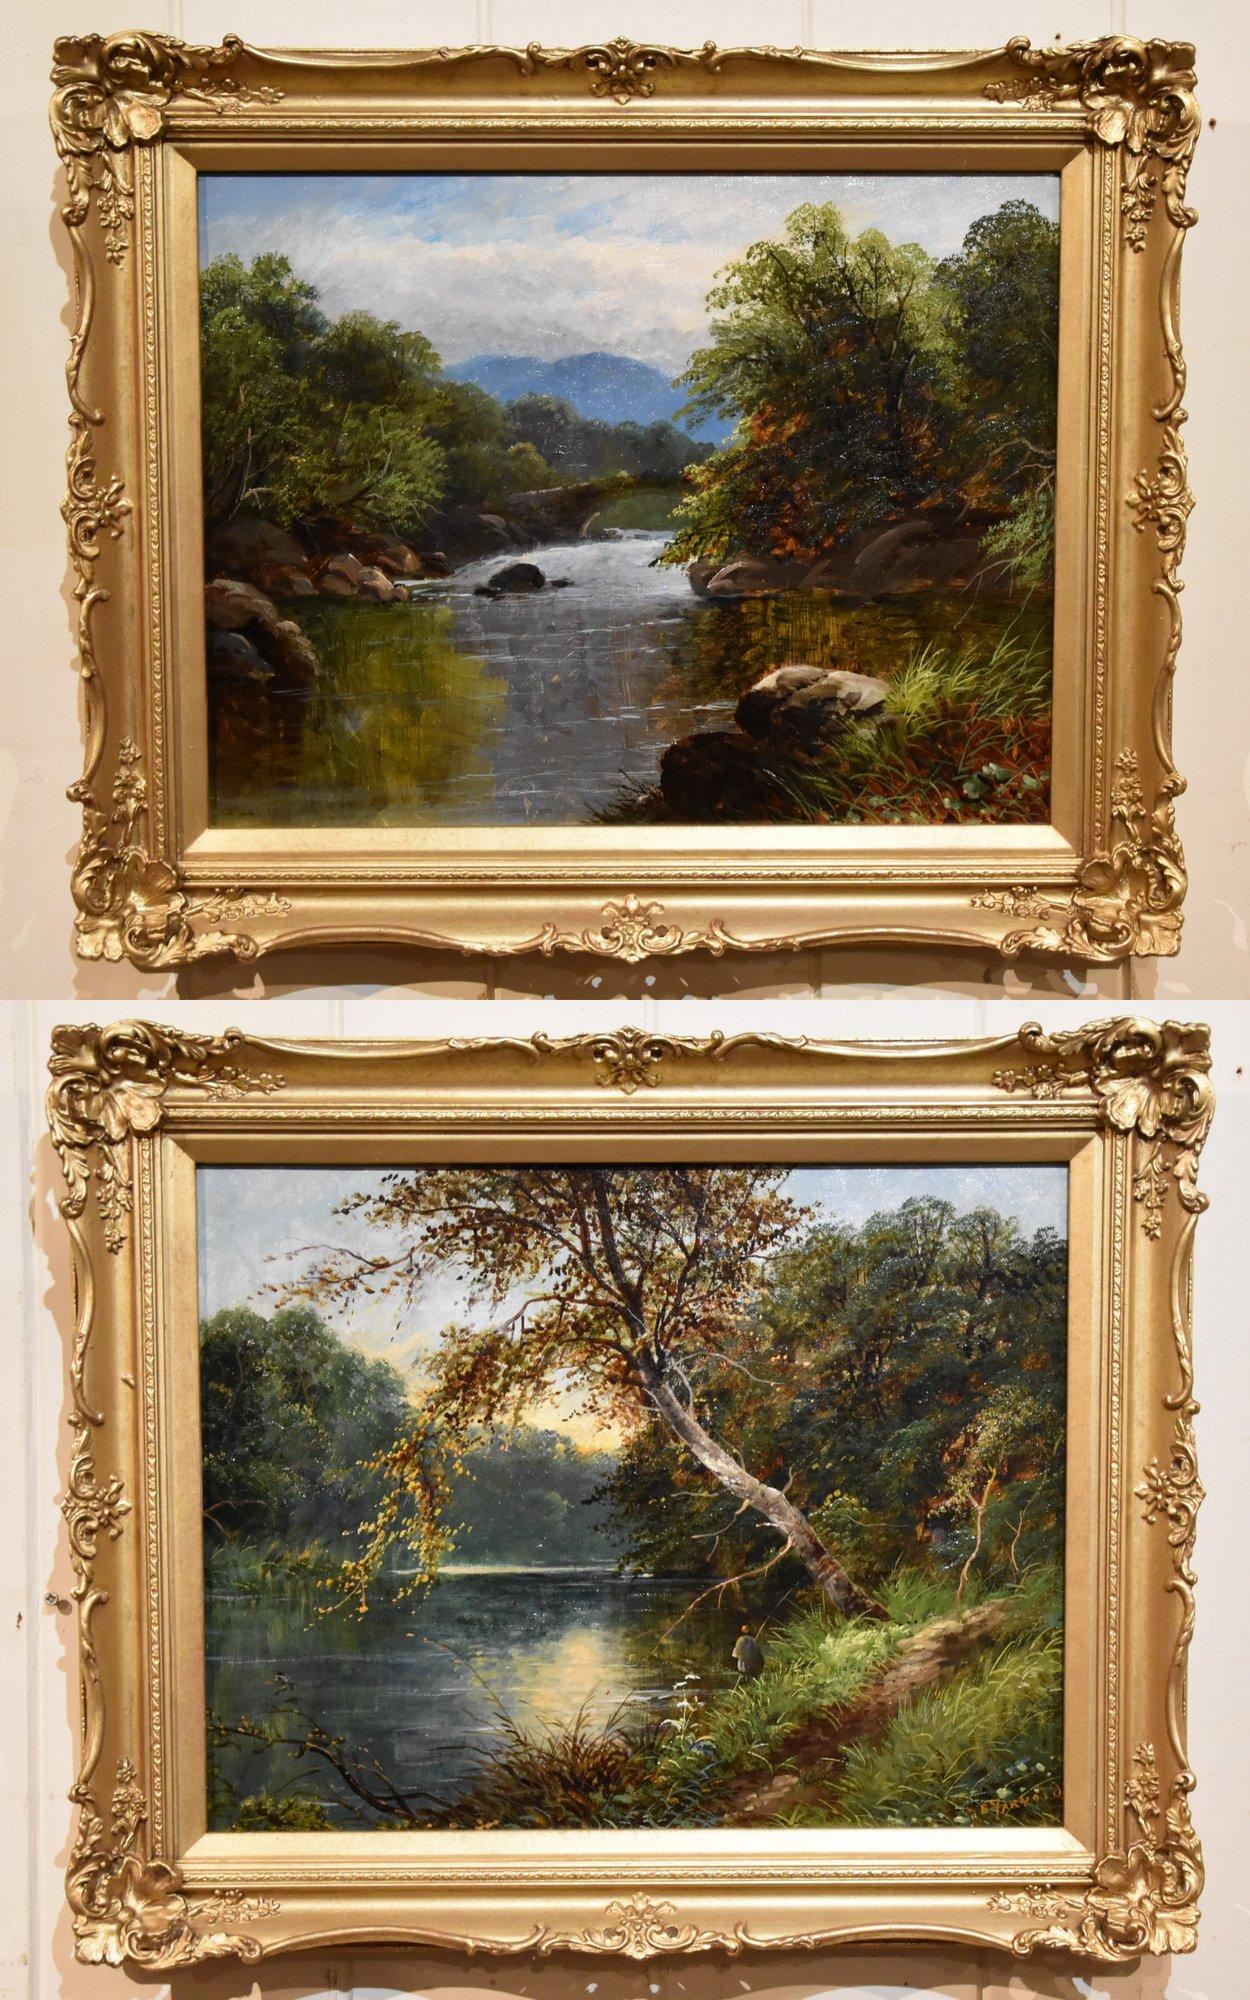 Oil Painting Pair by George Batista Yarnold "Evening by the River" 1851 - 1895Yarnold was a South London painter of waterfalls and riverscapes. His father was a comedian and his mother was Spanish. Both oil on canvas, one signed

Dimensions unframed